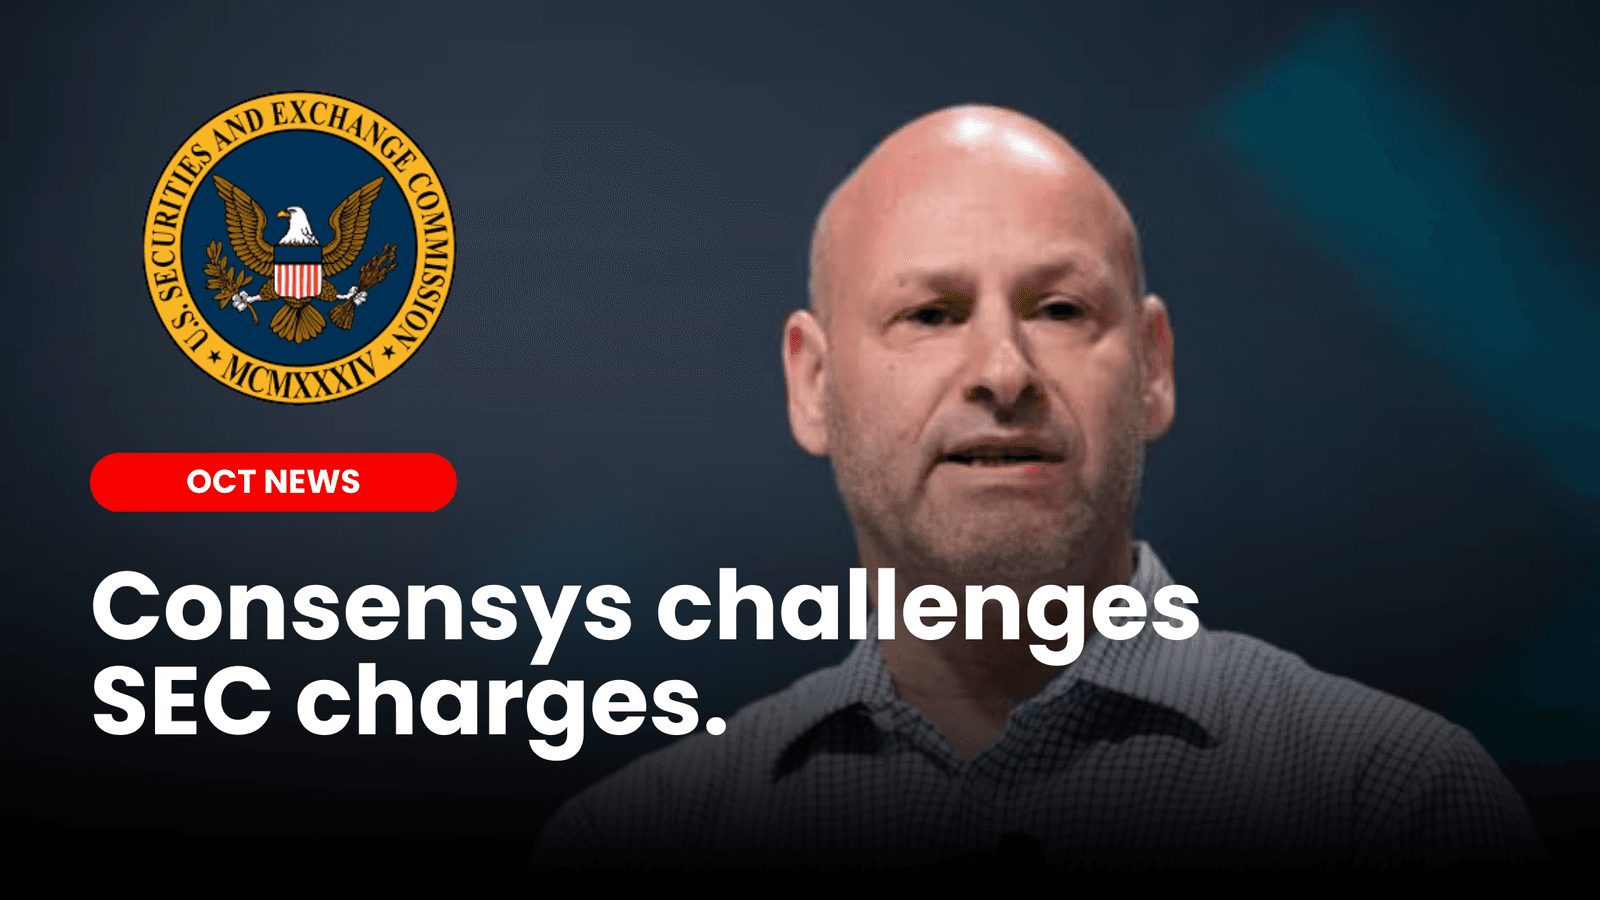 Consensys Challenges SEC Charges: Asserts Metamask is Beyond SEC Jurisdiction